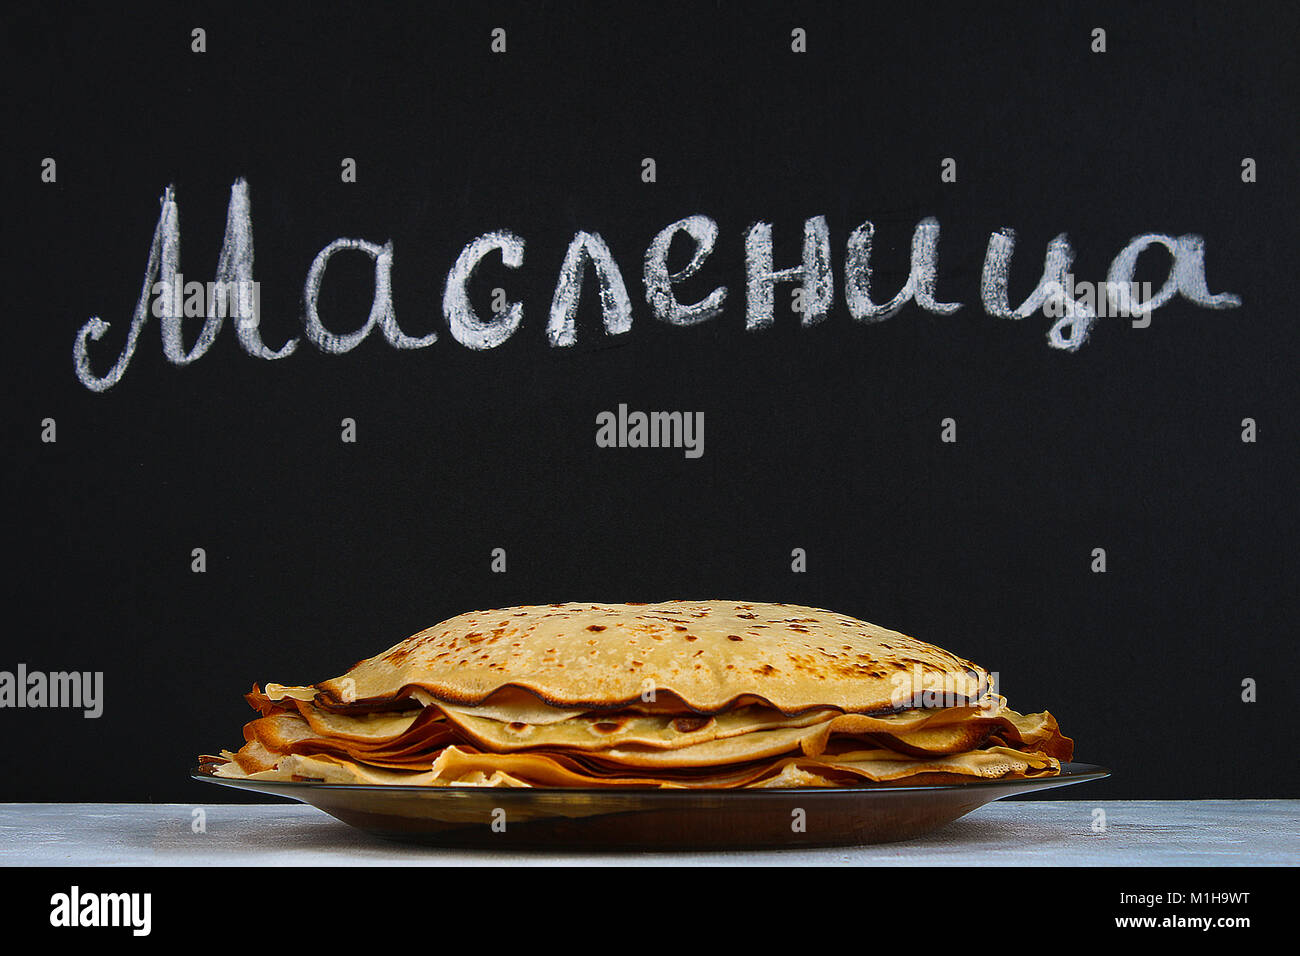 The inscription on a chalkboard in Russian: Maslenitsa. Traditional Ukrainian or Russian pancakes. Traditional dishes on the holiday Carnival Maslenit Stock Photo